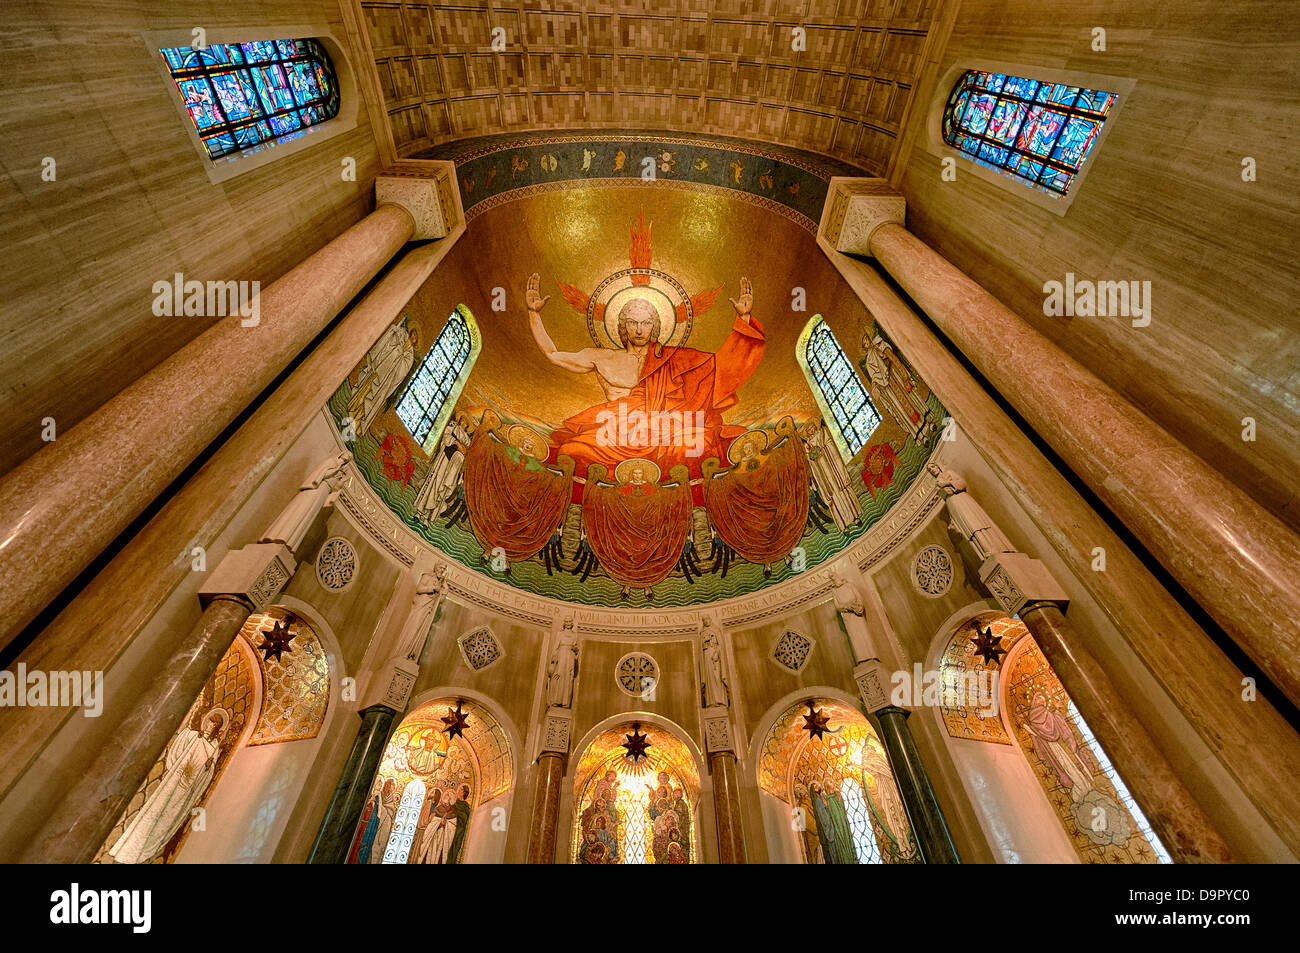 Christ in Majesty, North Apse, Basilica of the National Shrine of the Immaculate Conception, Washington DC, USA Stock Photo